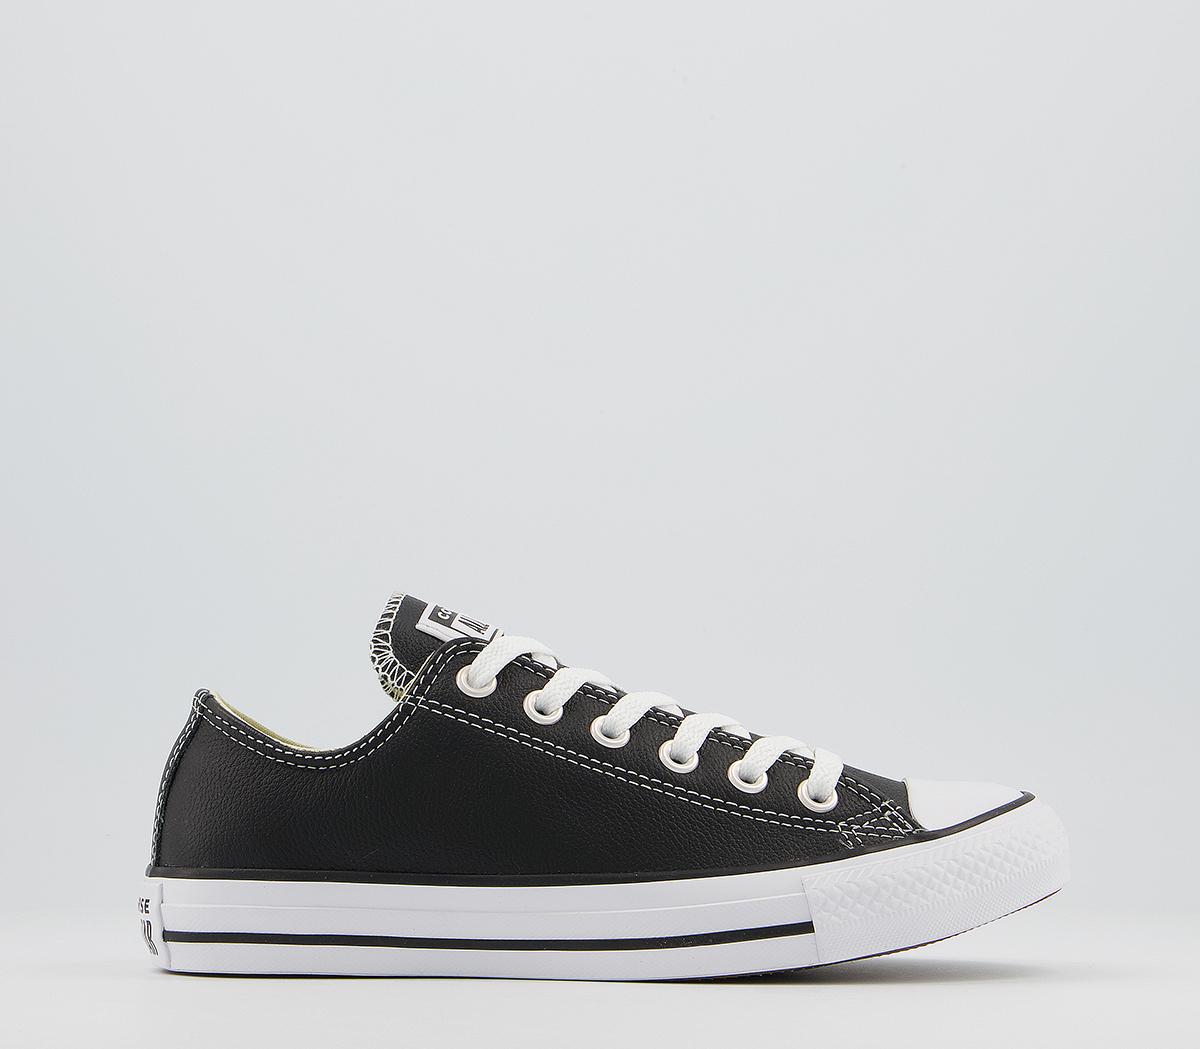 ConverseAll Star Low Leather TrainersBlack White Leather